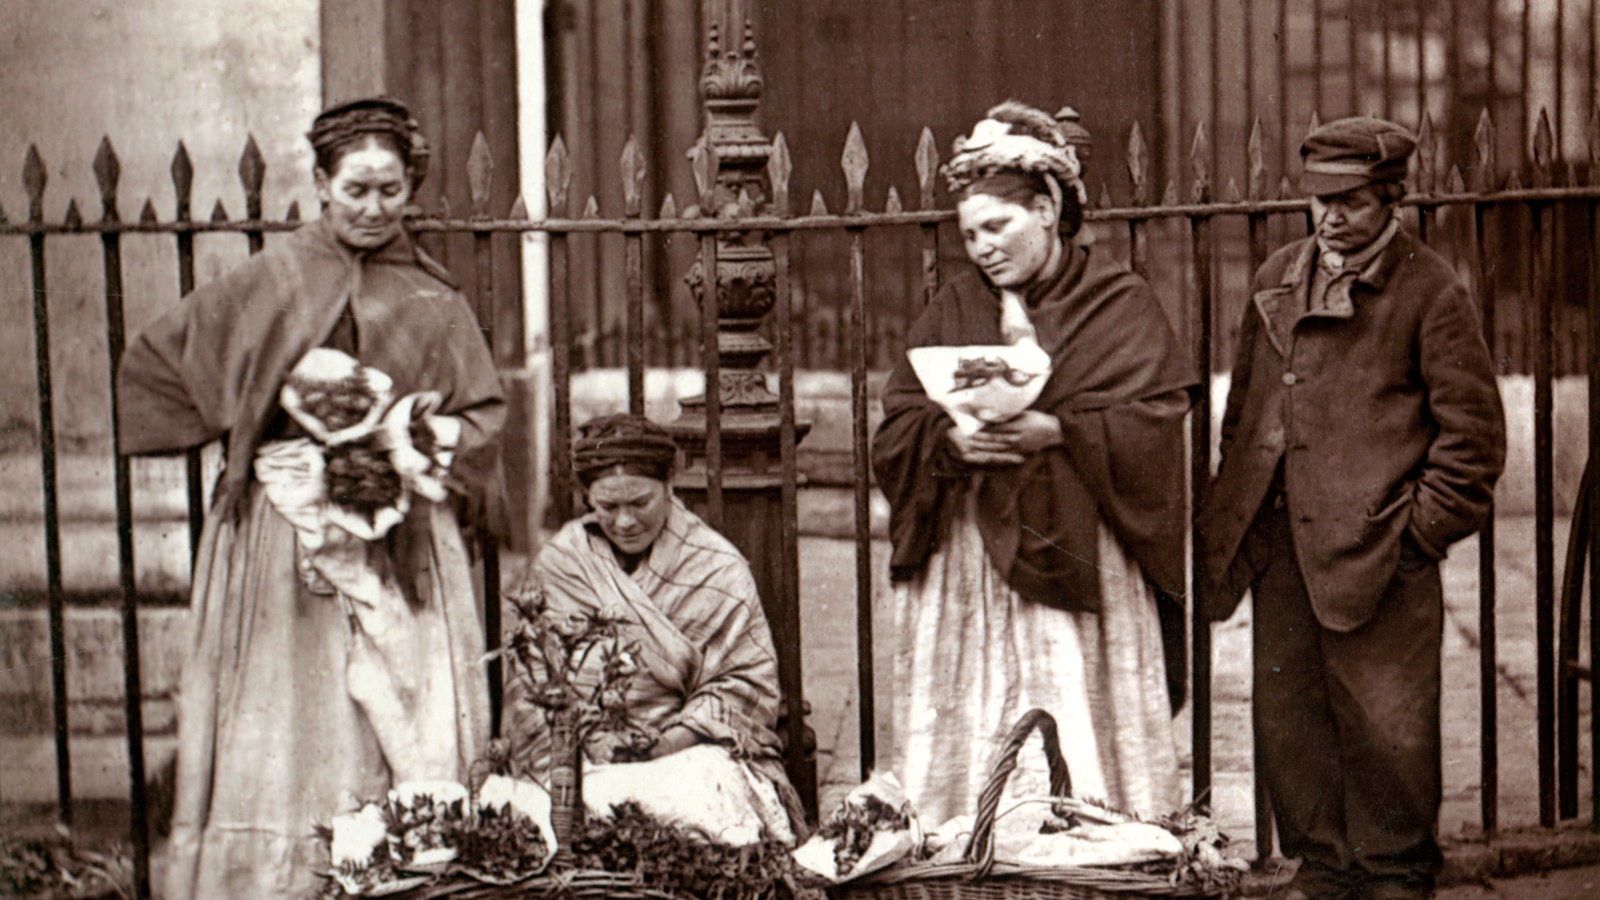 Four people in a line looking downwards at baskets in front of them which appear to have flowers in them.